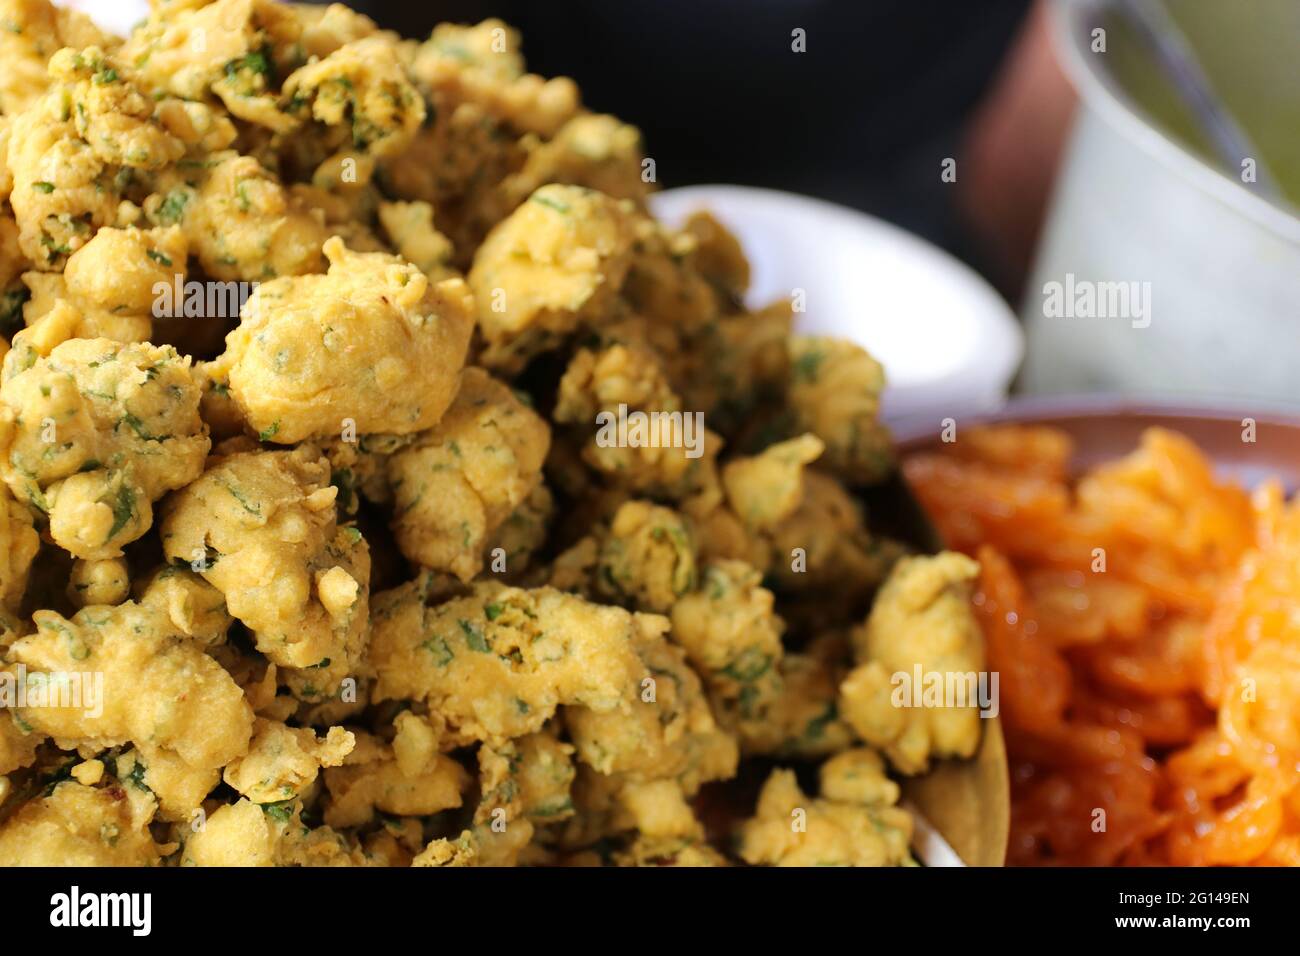 Traditional Indian street food. Sweet food, food with spice Stock Photo